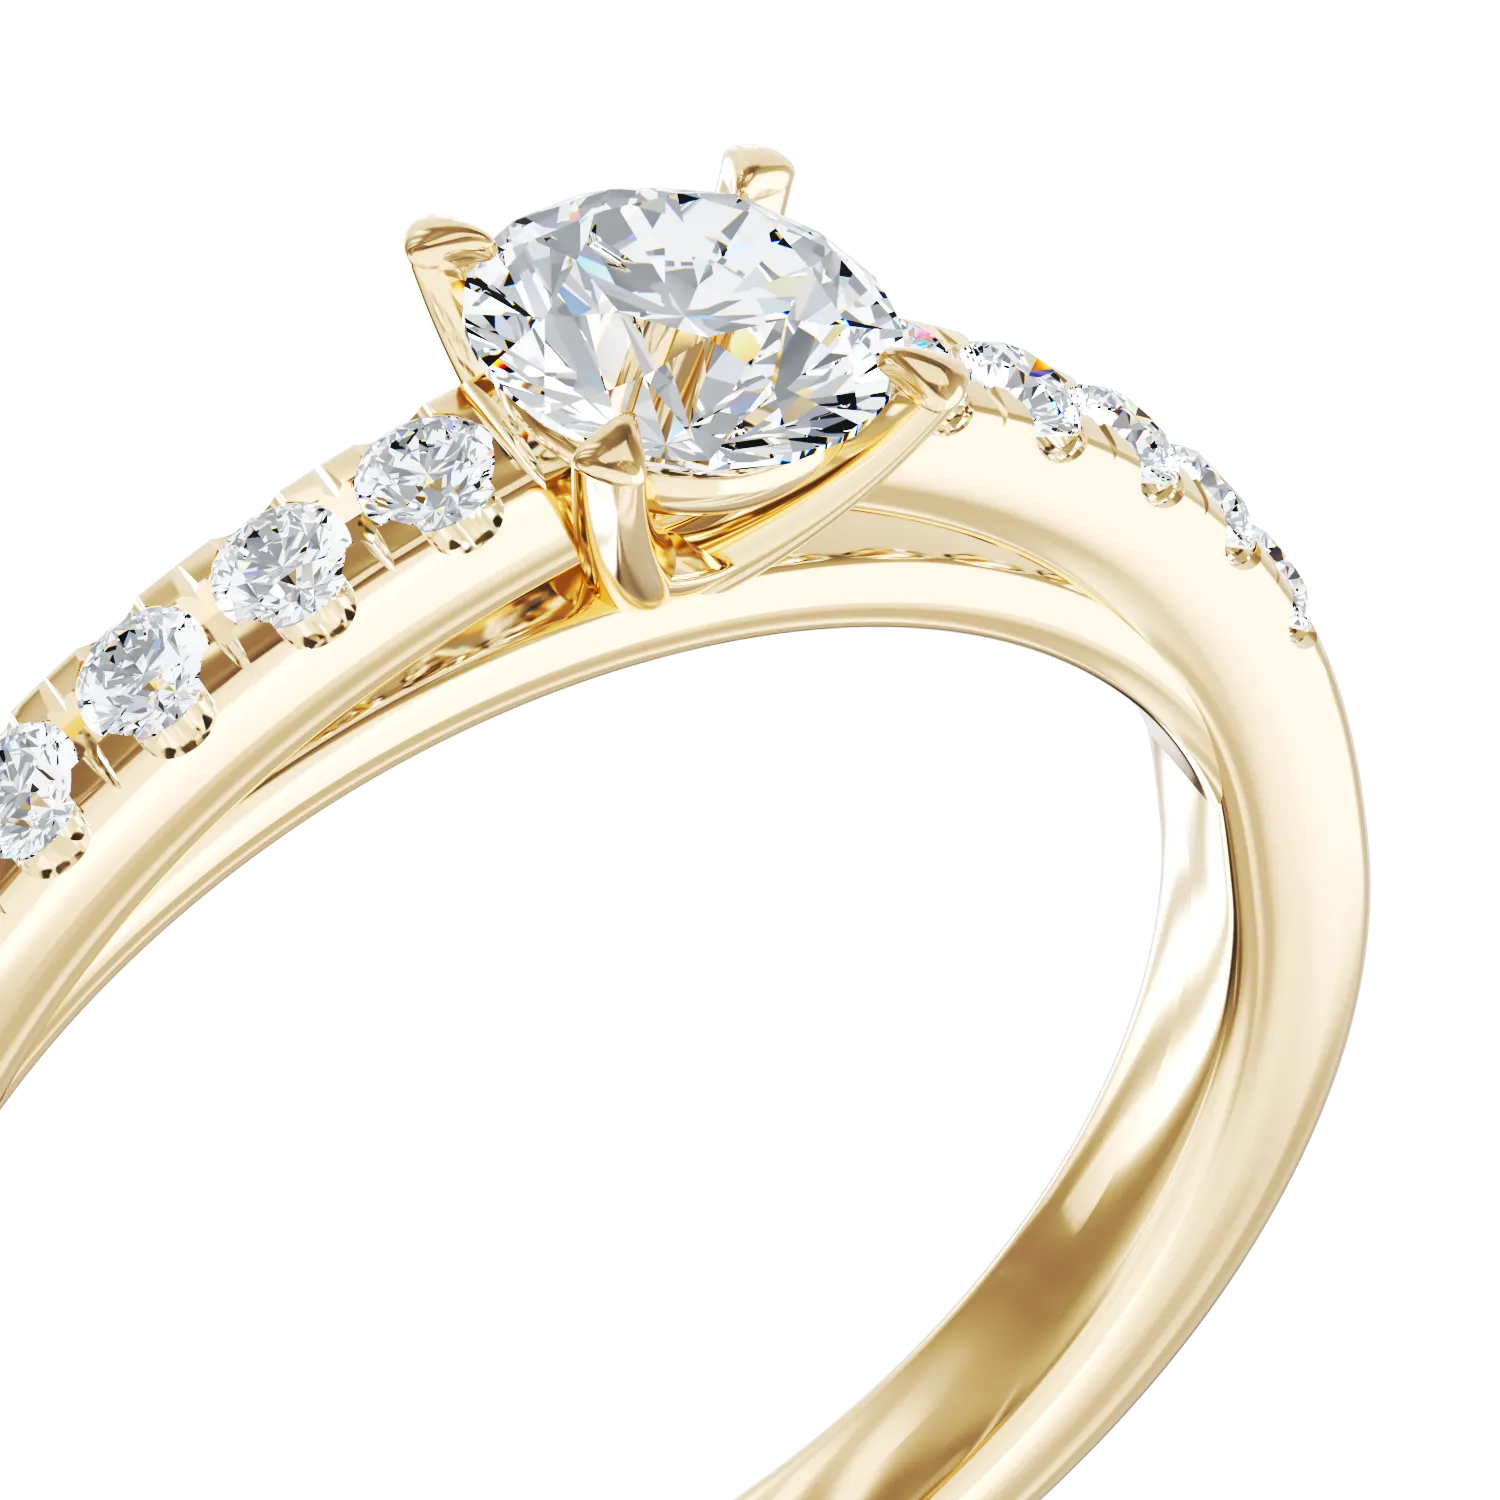 18K yellow gold engagement ring with 0.4ct diamond and 0.14ct diamonds